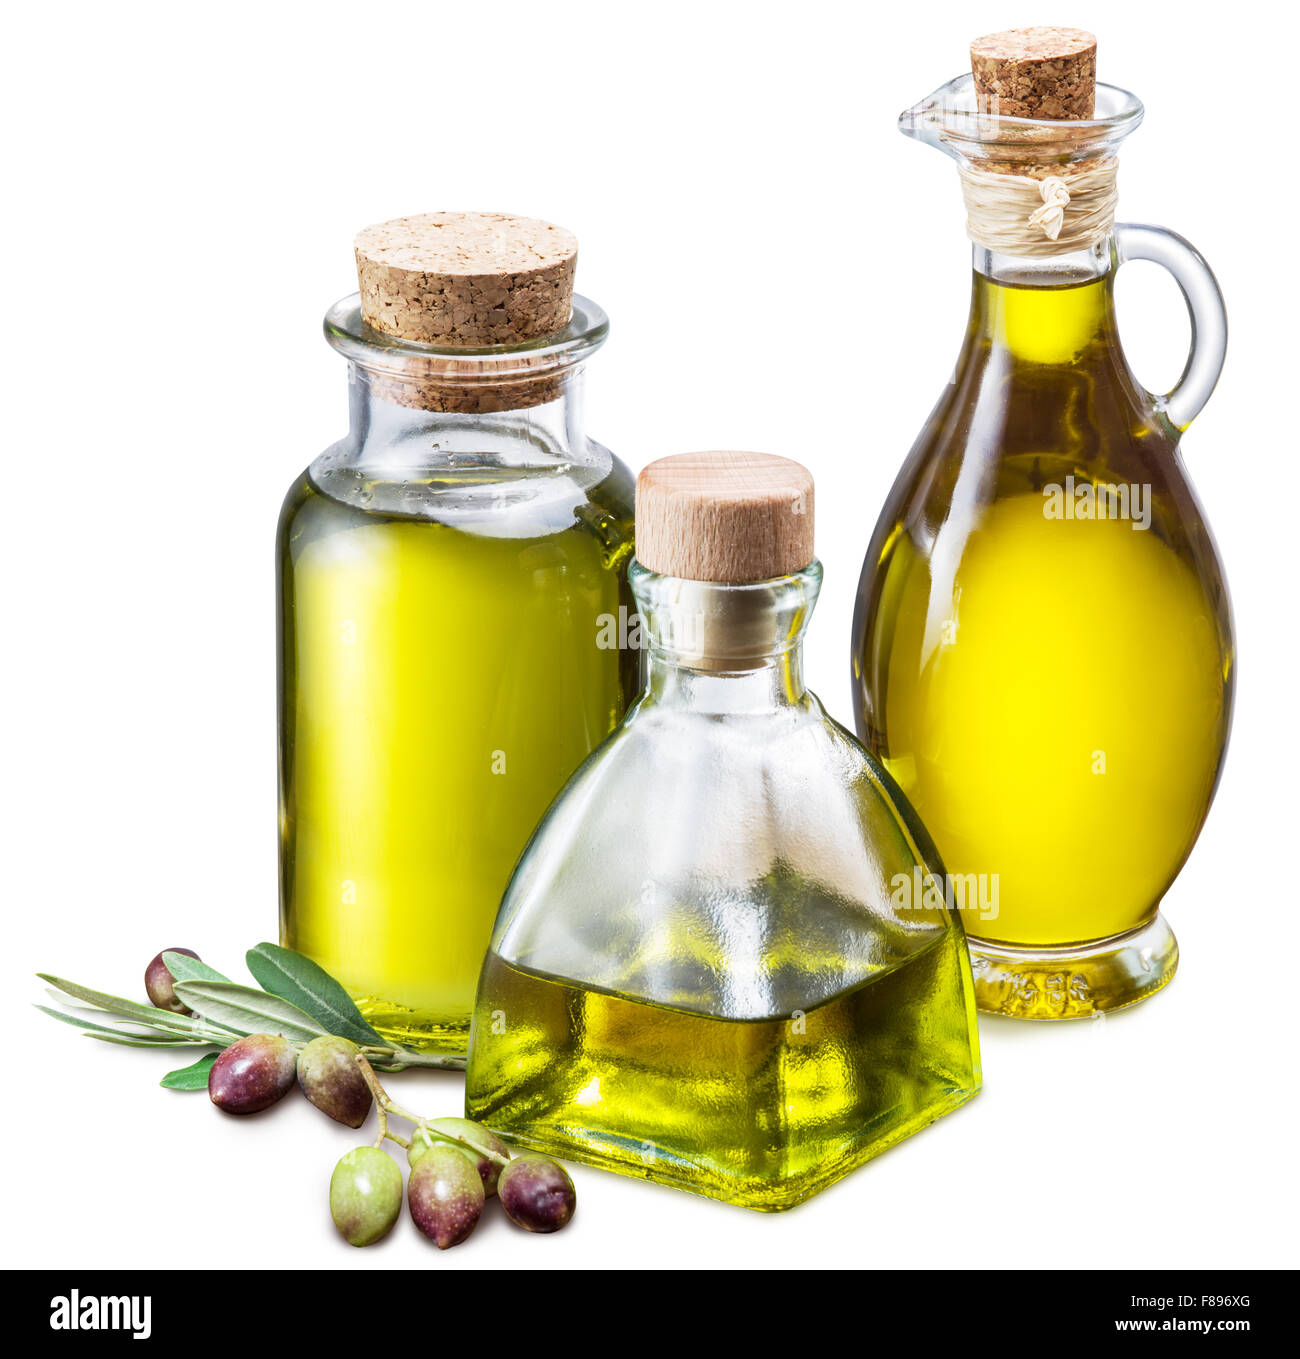 Olive oil and berries on the wooden table. File contains clipping paths. Stock Photo